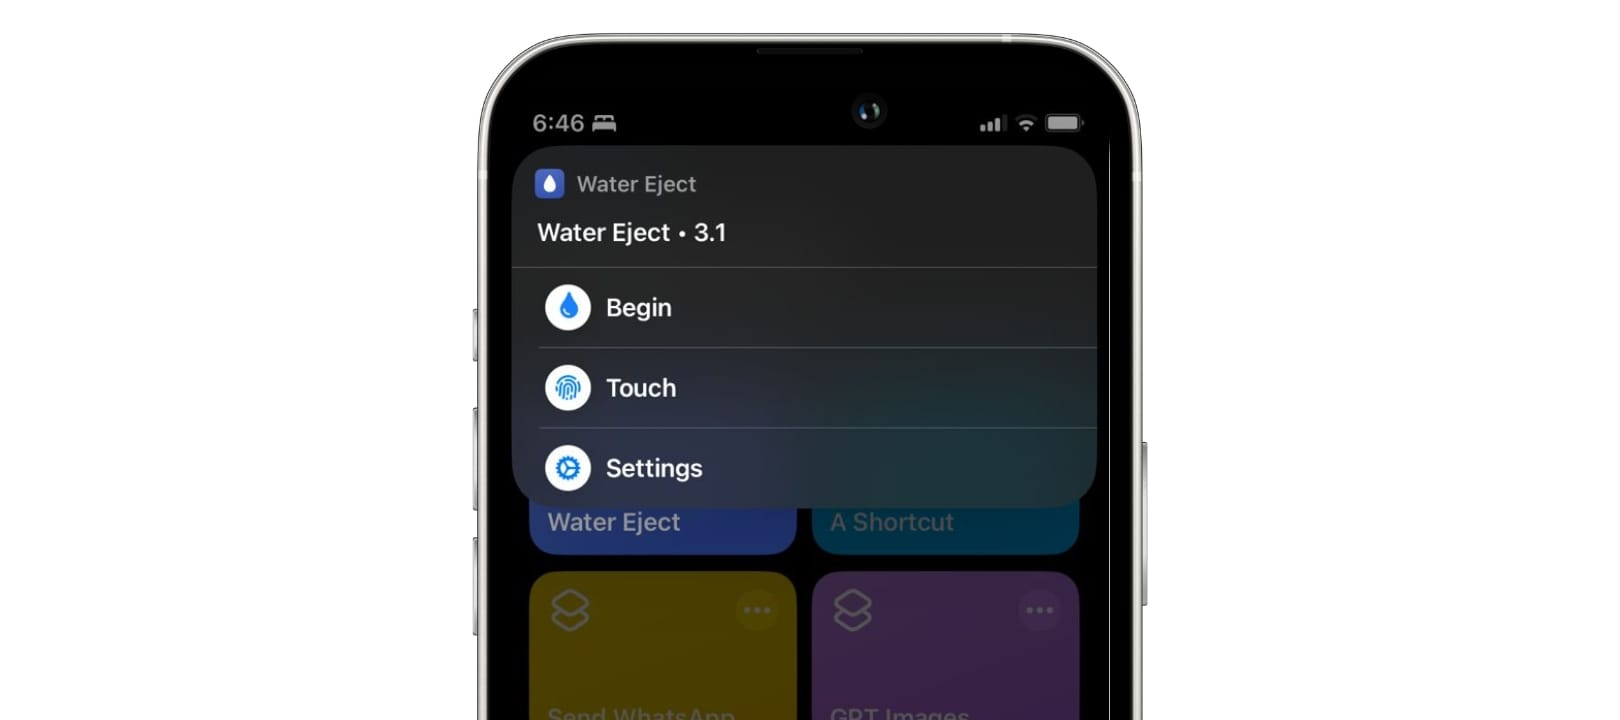 How to Eject Water From iPhone Using Apple Shortcuts